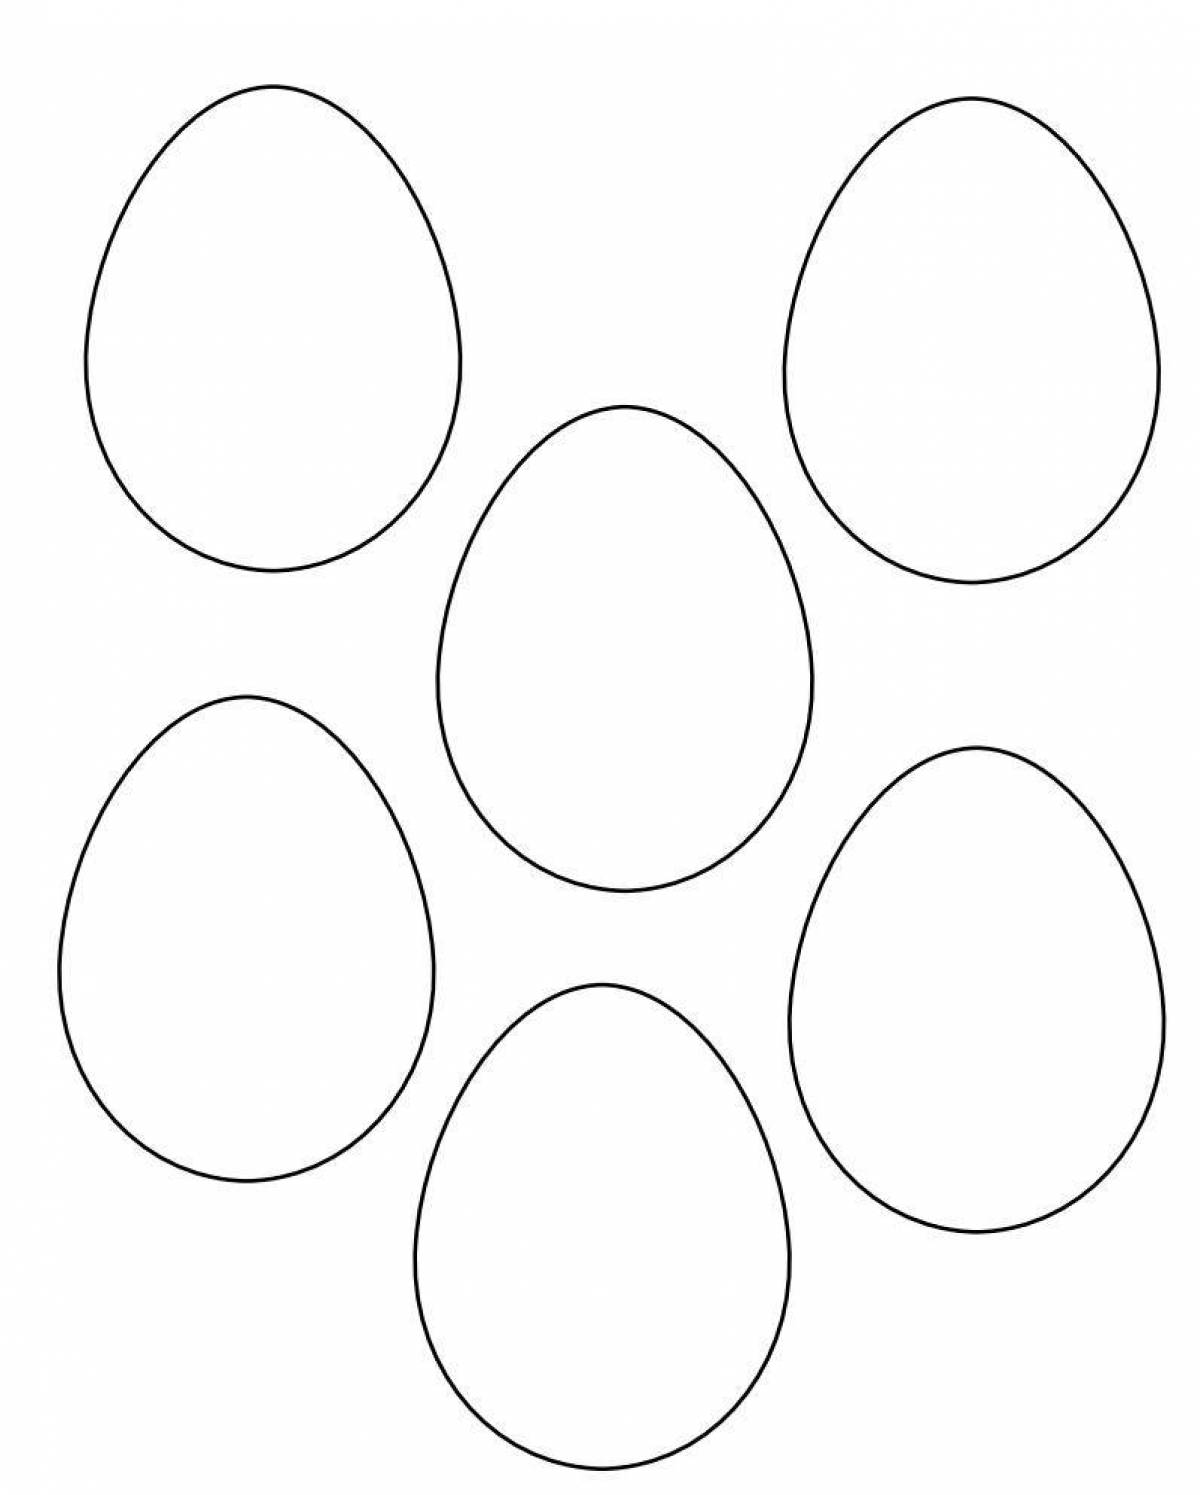 Lovely chicken egg coloring page